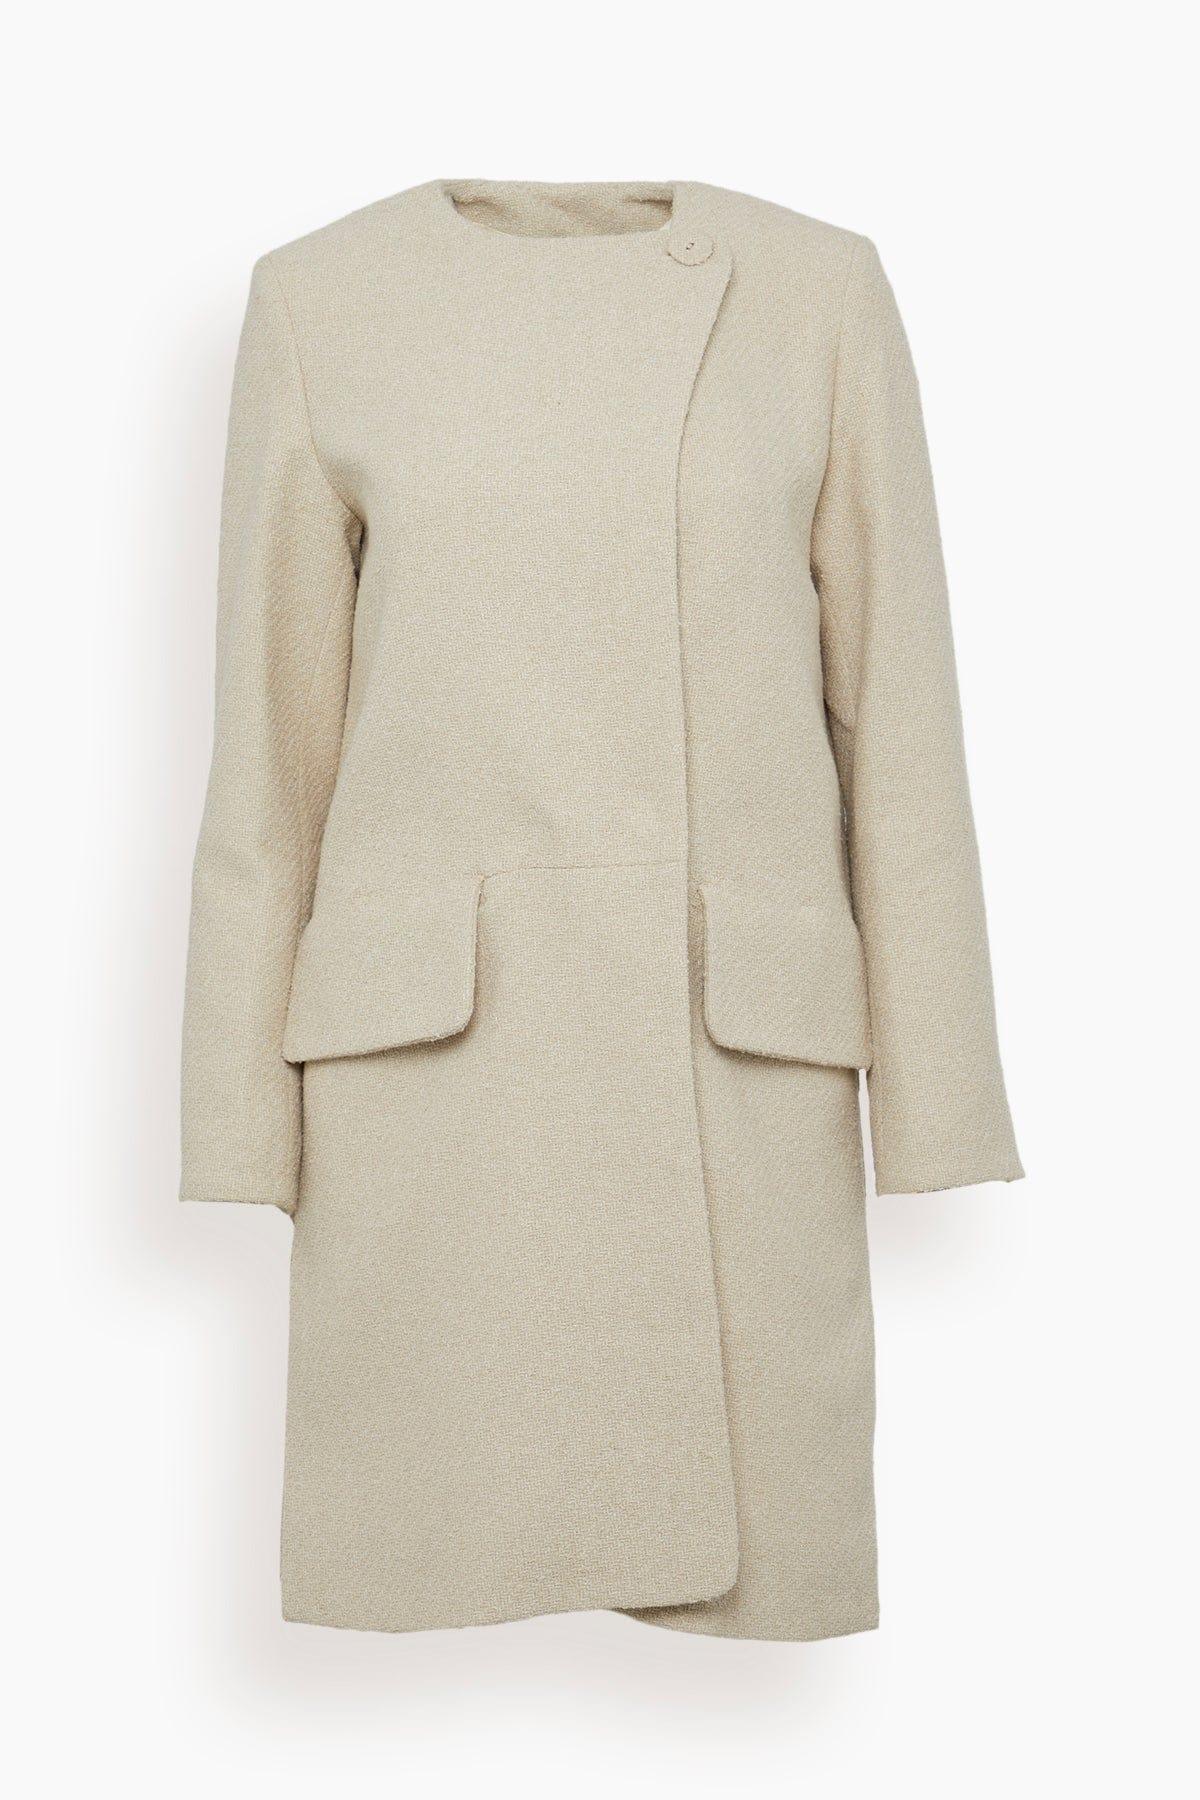 By Malene Birger Cotton Clarries Jacket in Natural | Lyst